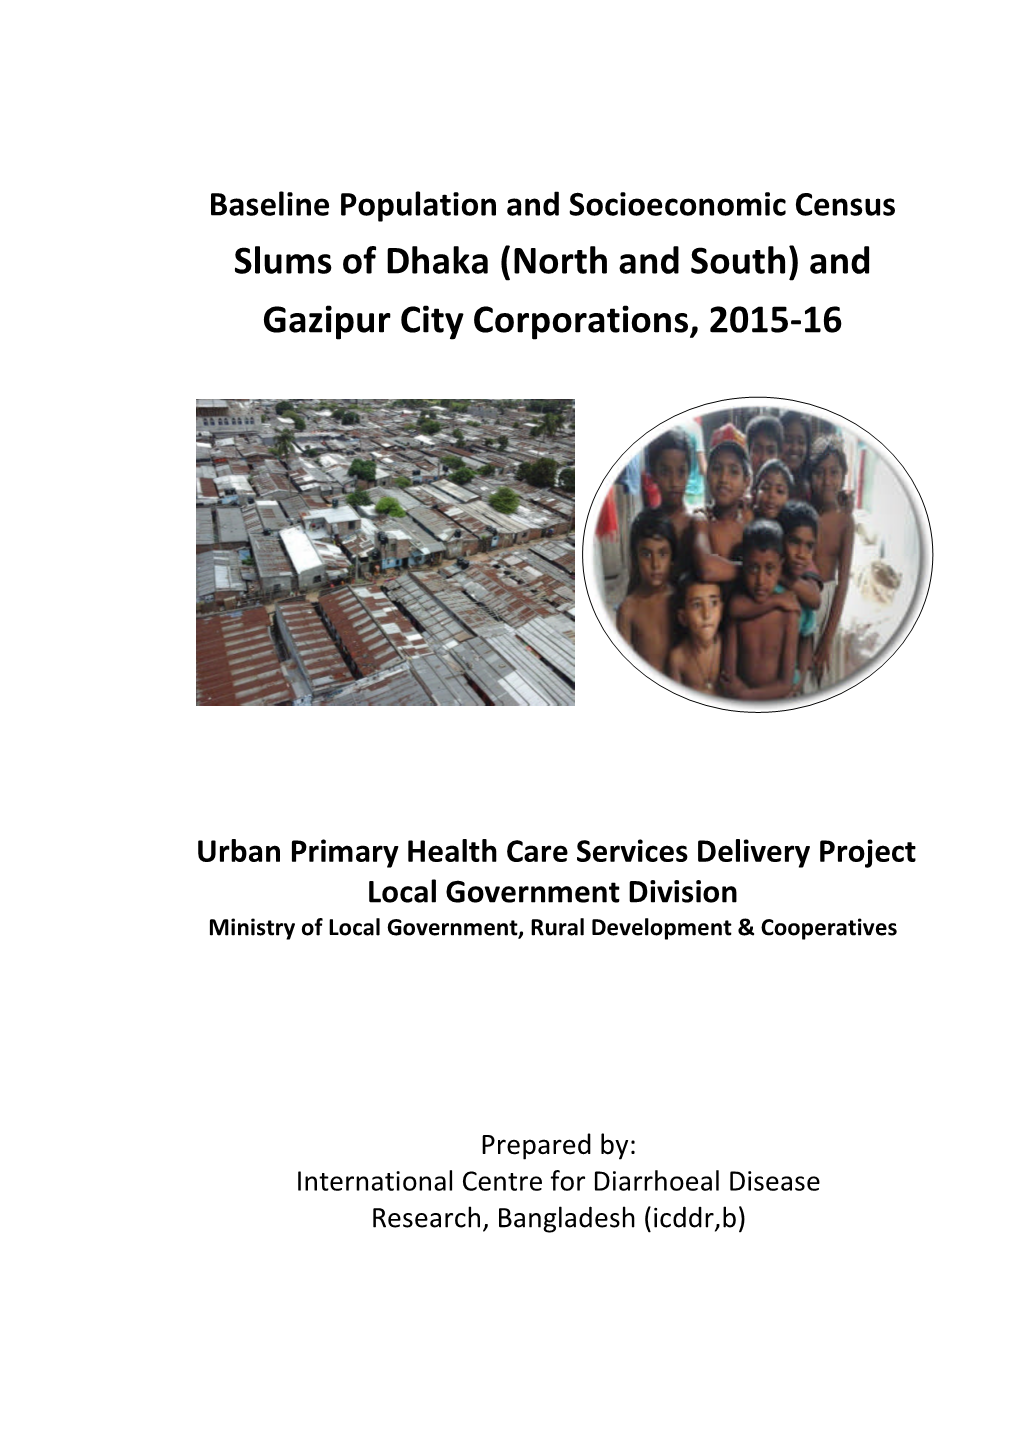 Slums of Dhaka (North and South) and Gazipur City Corporations, 2015-16